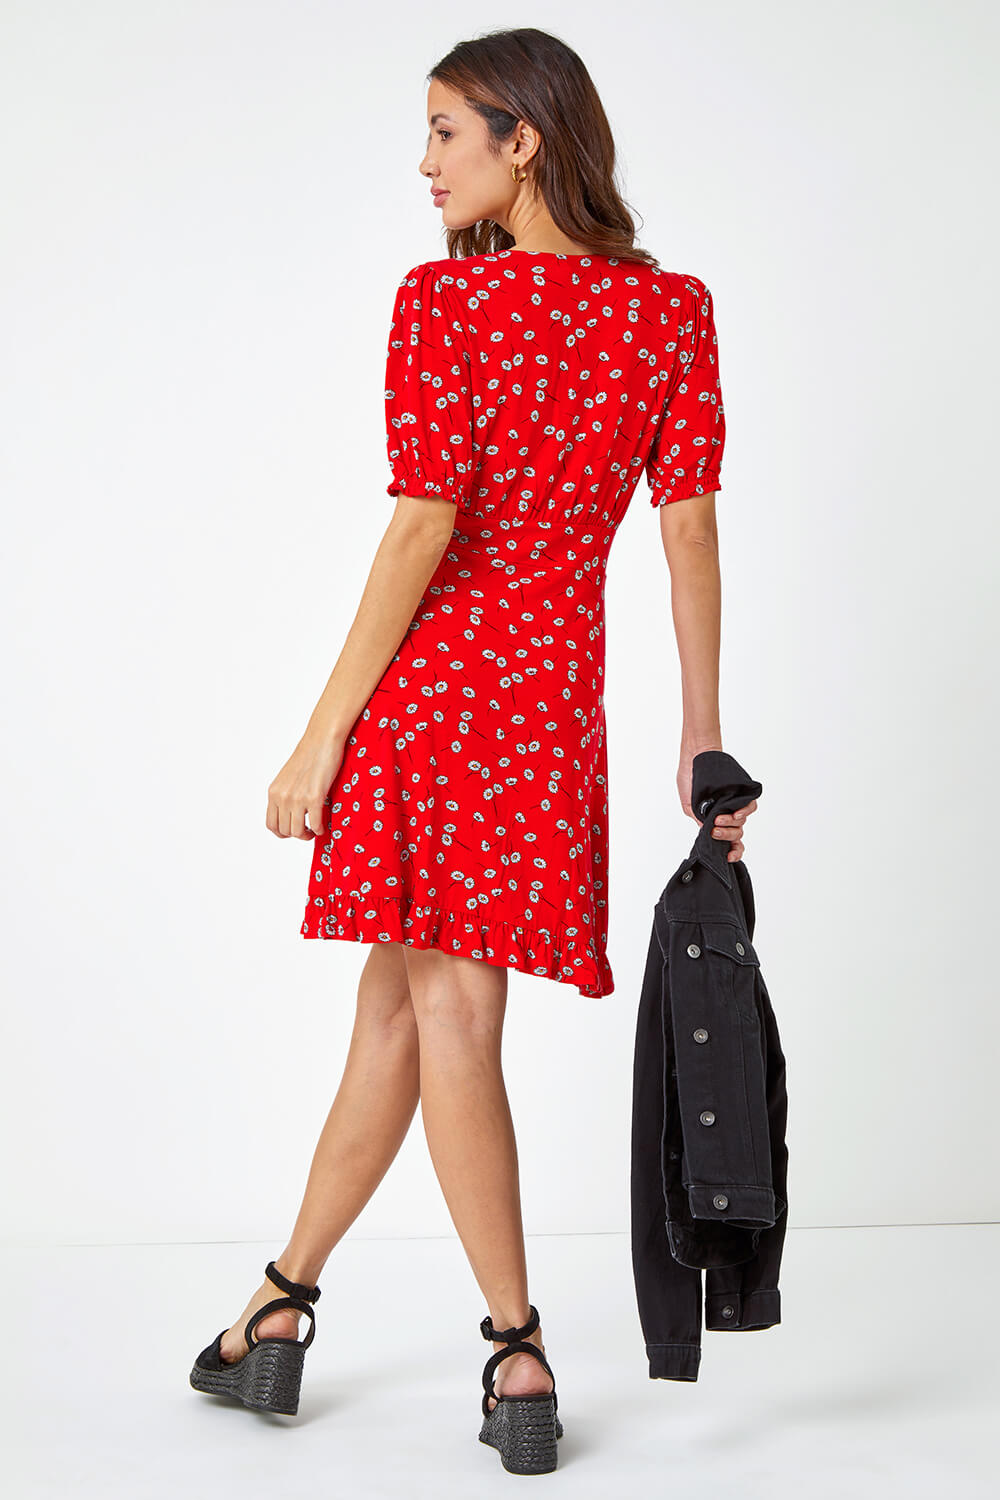 Red Floral Print Frill Tea Dress, Image 3 of 5